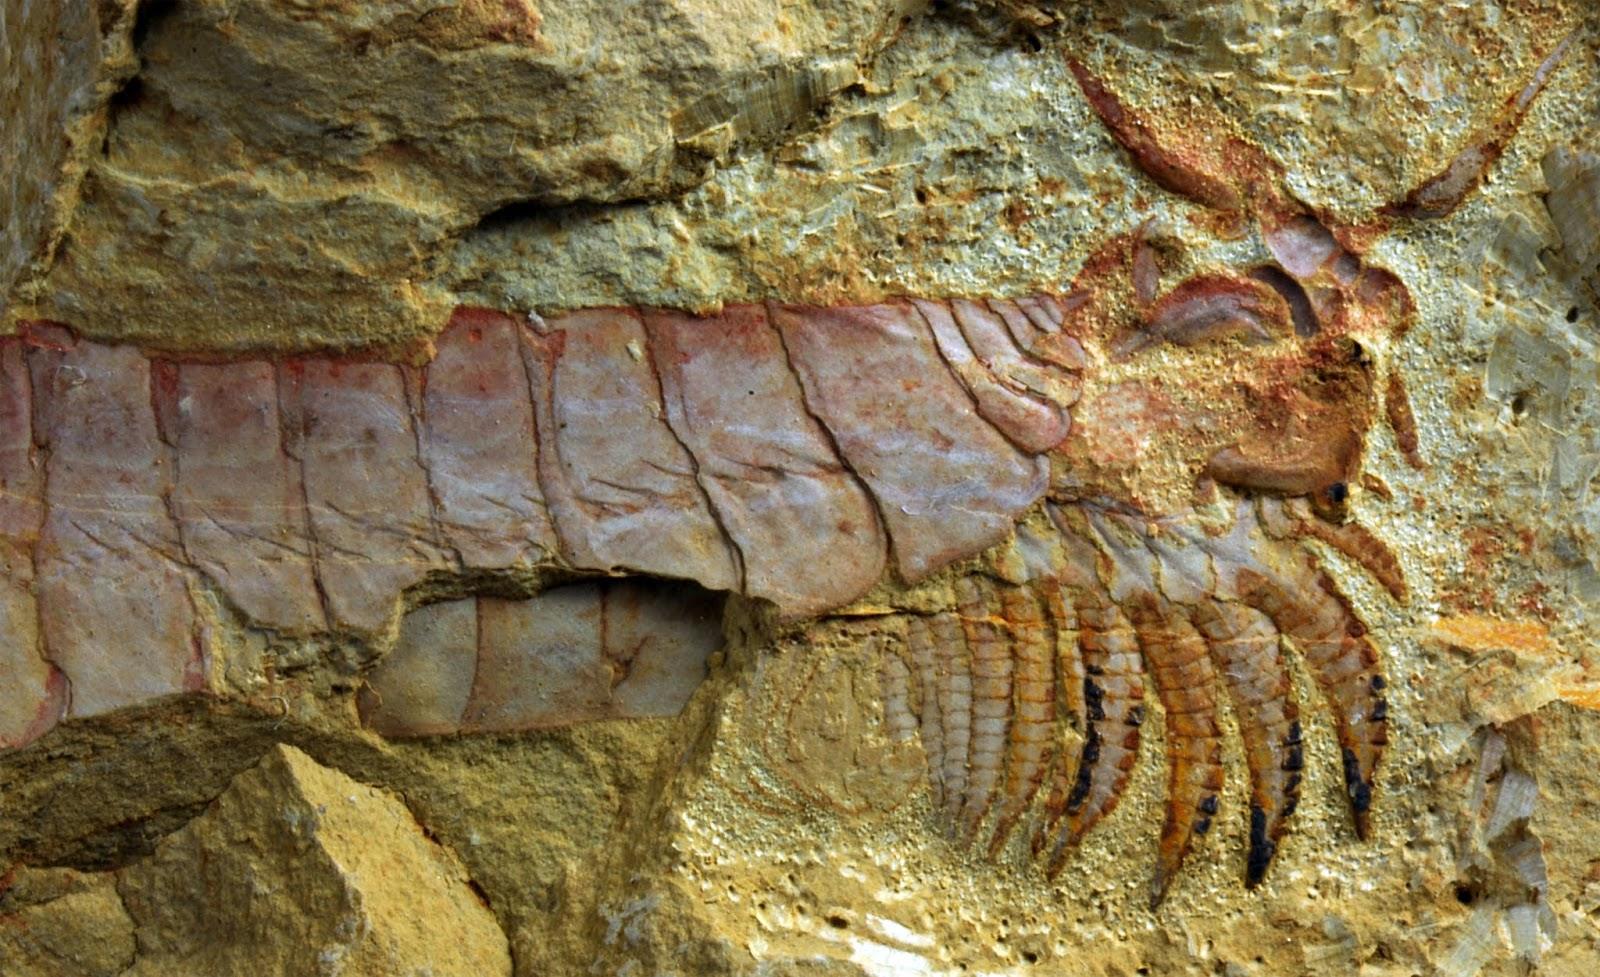 500-million-year-old sea creature with limbs under its head unearthed 1